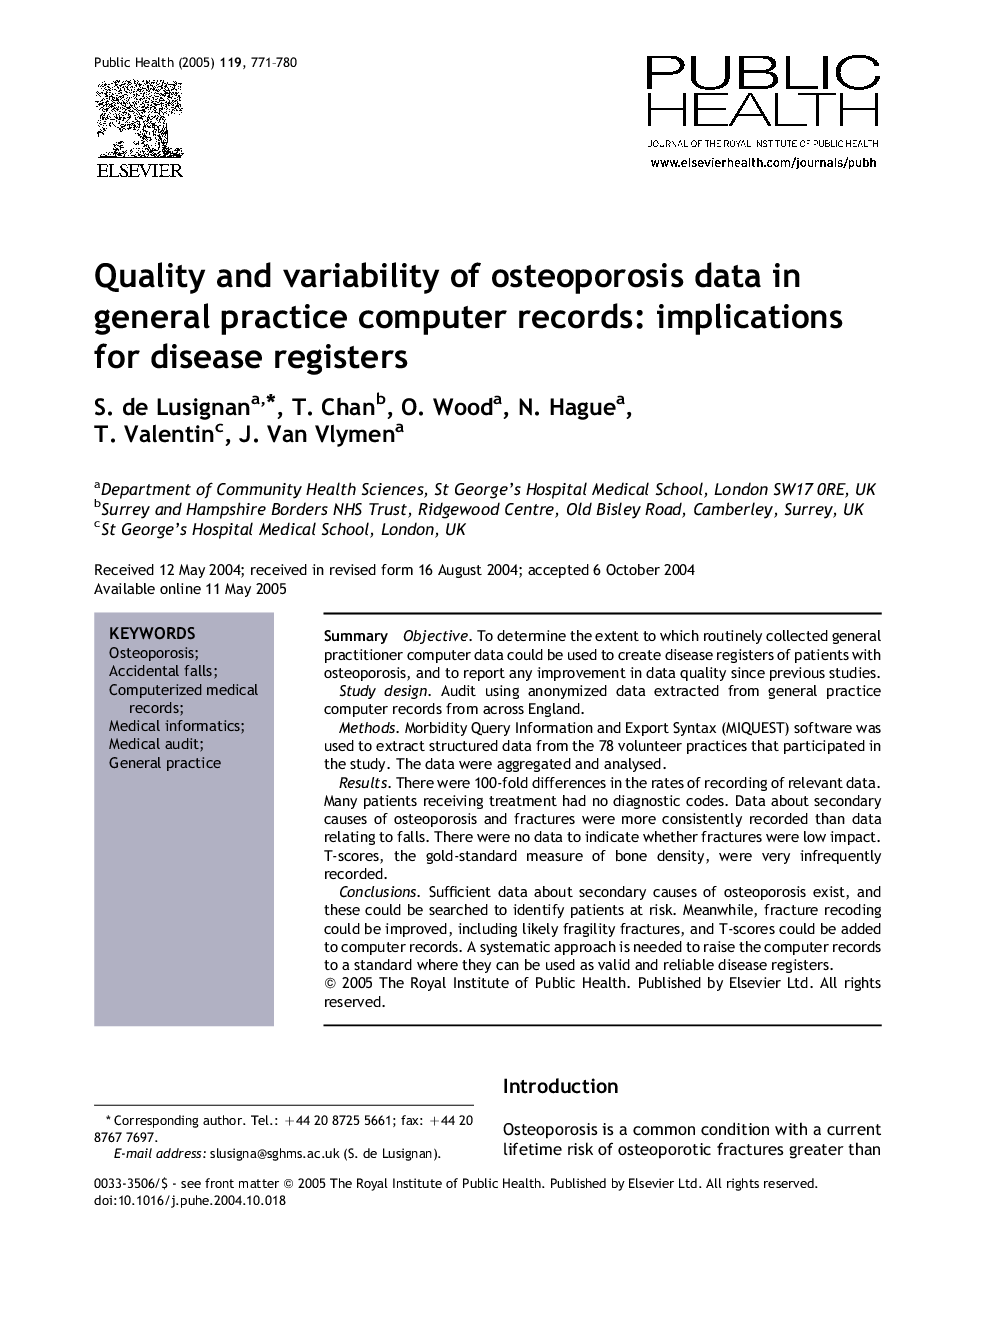 Quality and variability of osteoporosis data in general practice computer records: implications for disease registers